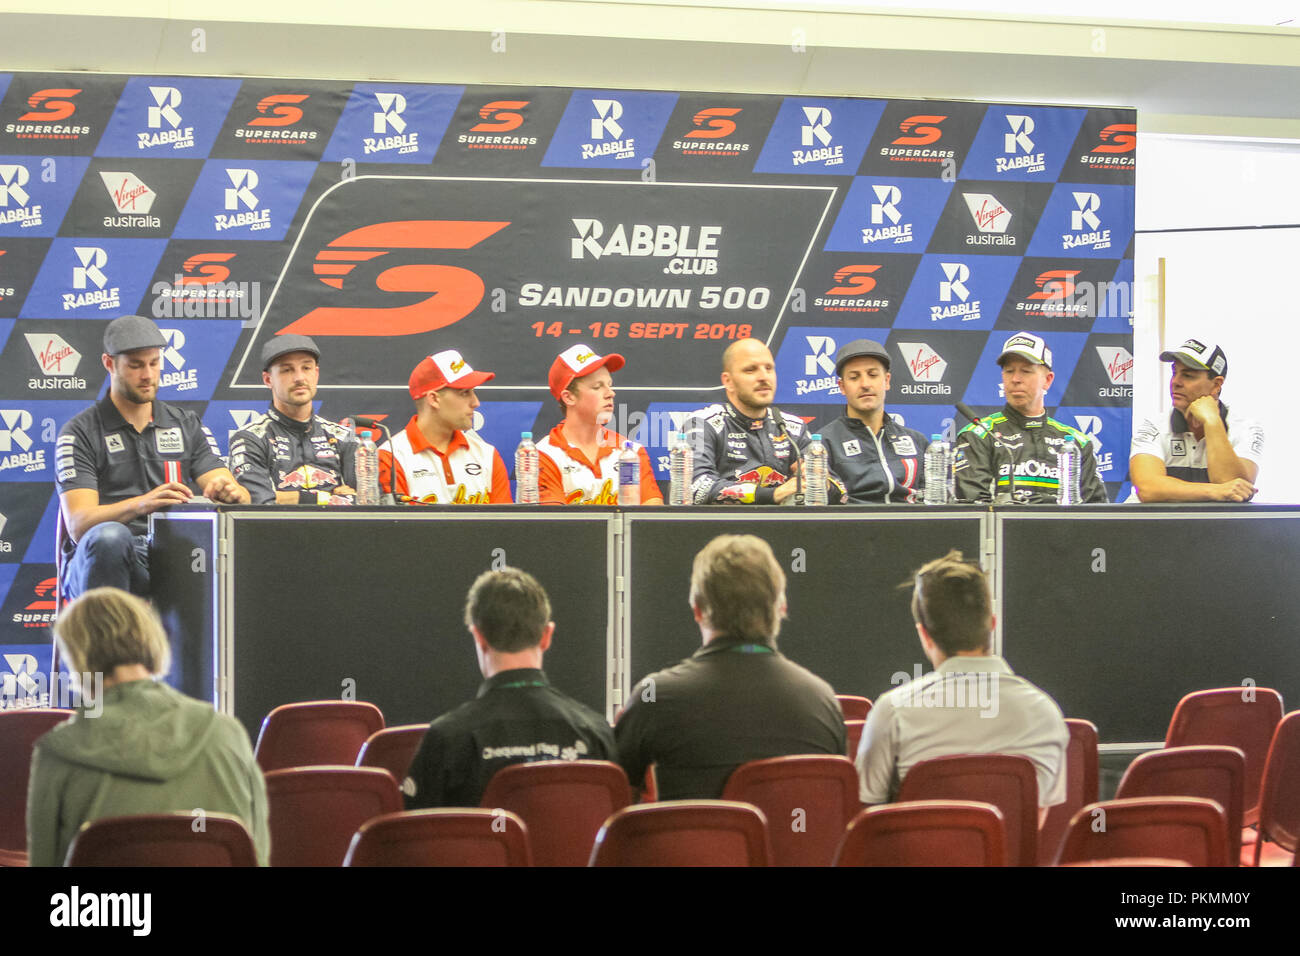 Sandown, Victoria, Australia. 14th Sep 2018. Rabble.Club Sandown 500 - Round 12 of the Virgin Australia V8 Supercars Championship 14 September 2018,Sandown , Victoria , Australia- Friday Press Conference No. 97 Shane van Gisbergen and Co Driver Earl Bamber-No.99 Anton De Pasquale and Co Driver Will Brown-No. 1 Jamie Whincup and Co Driver Paul Dumbrell & No.888 Craig Lowndes and Co Driver Steven Richards Credit: brett keating/Alamy Live News Stock Photo